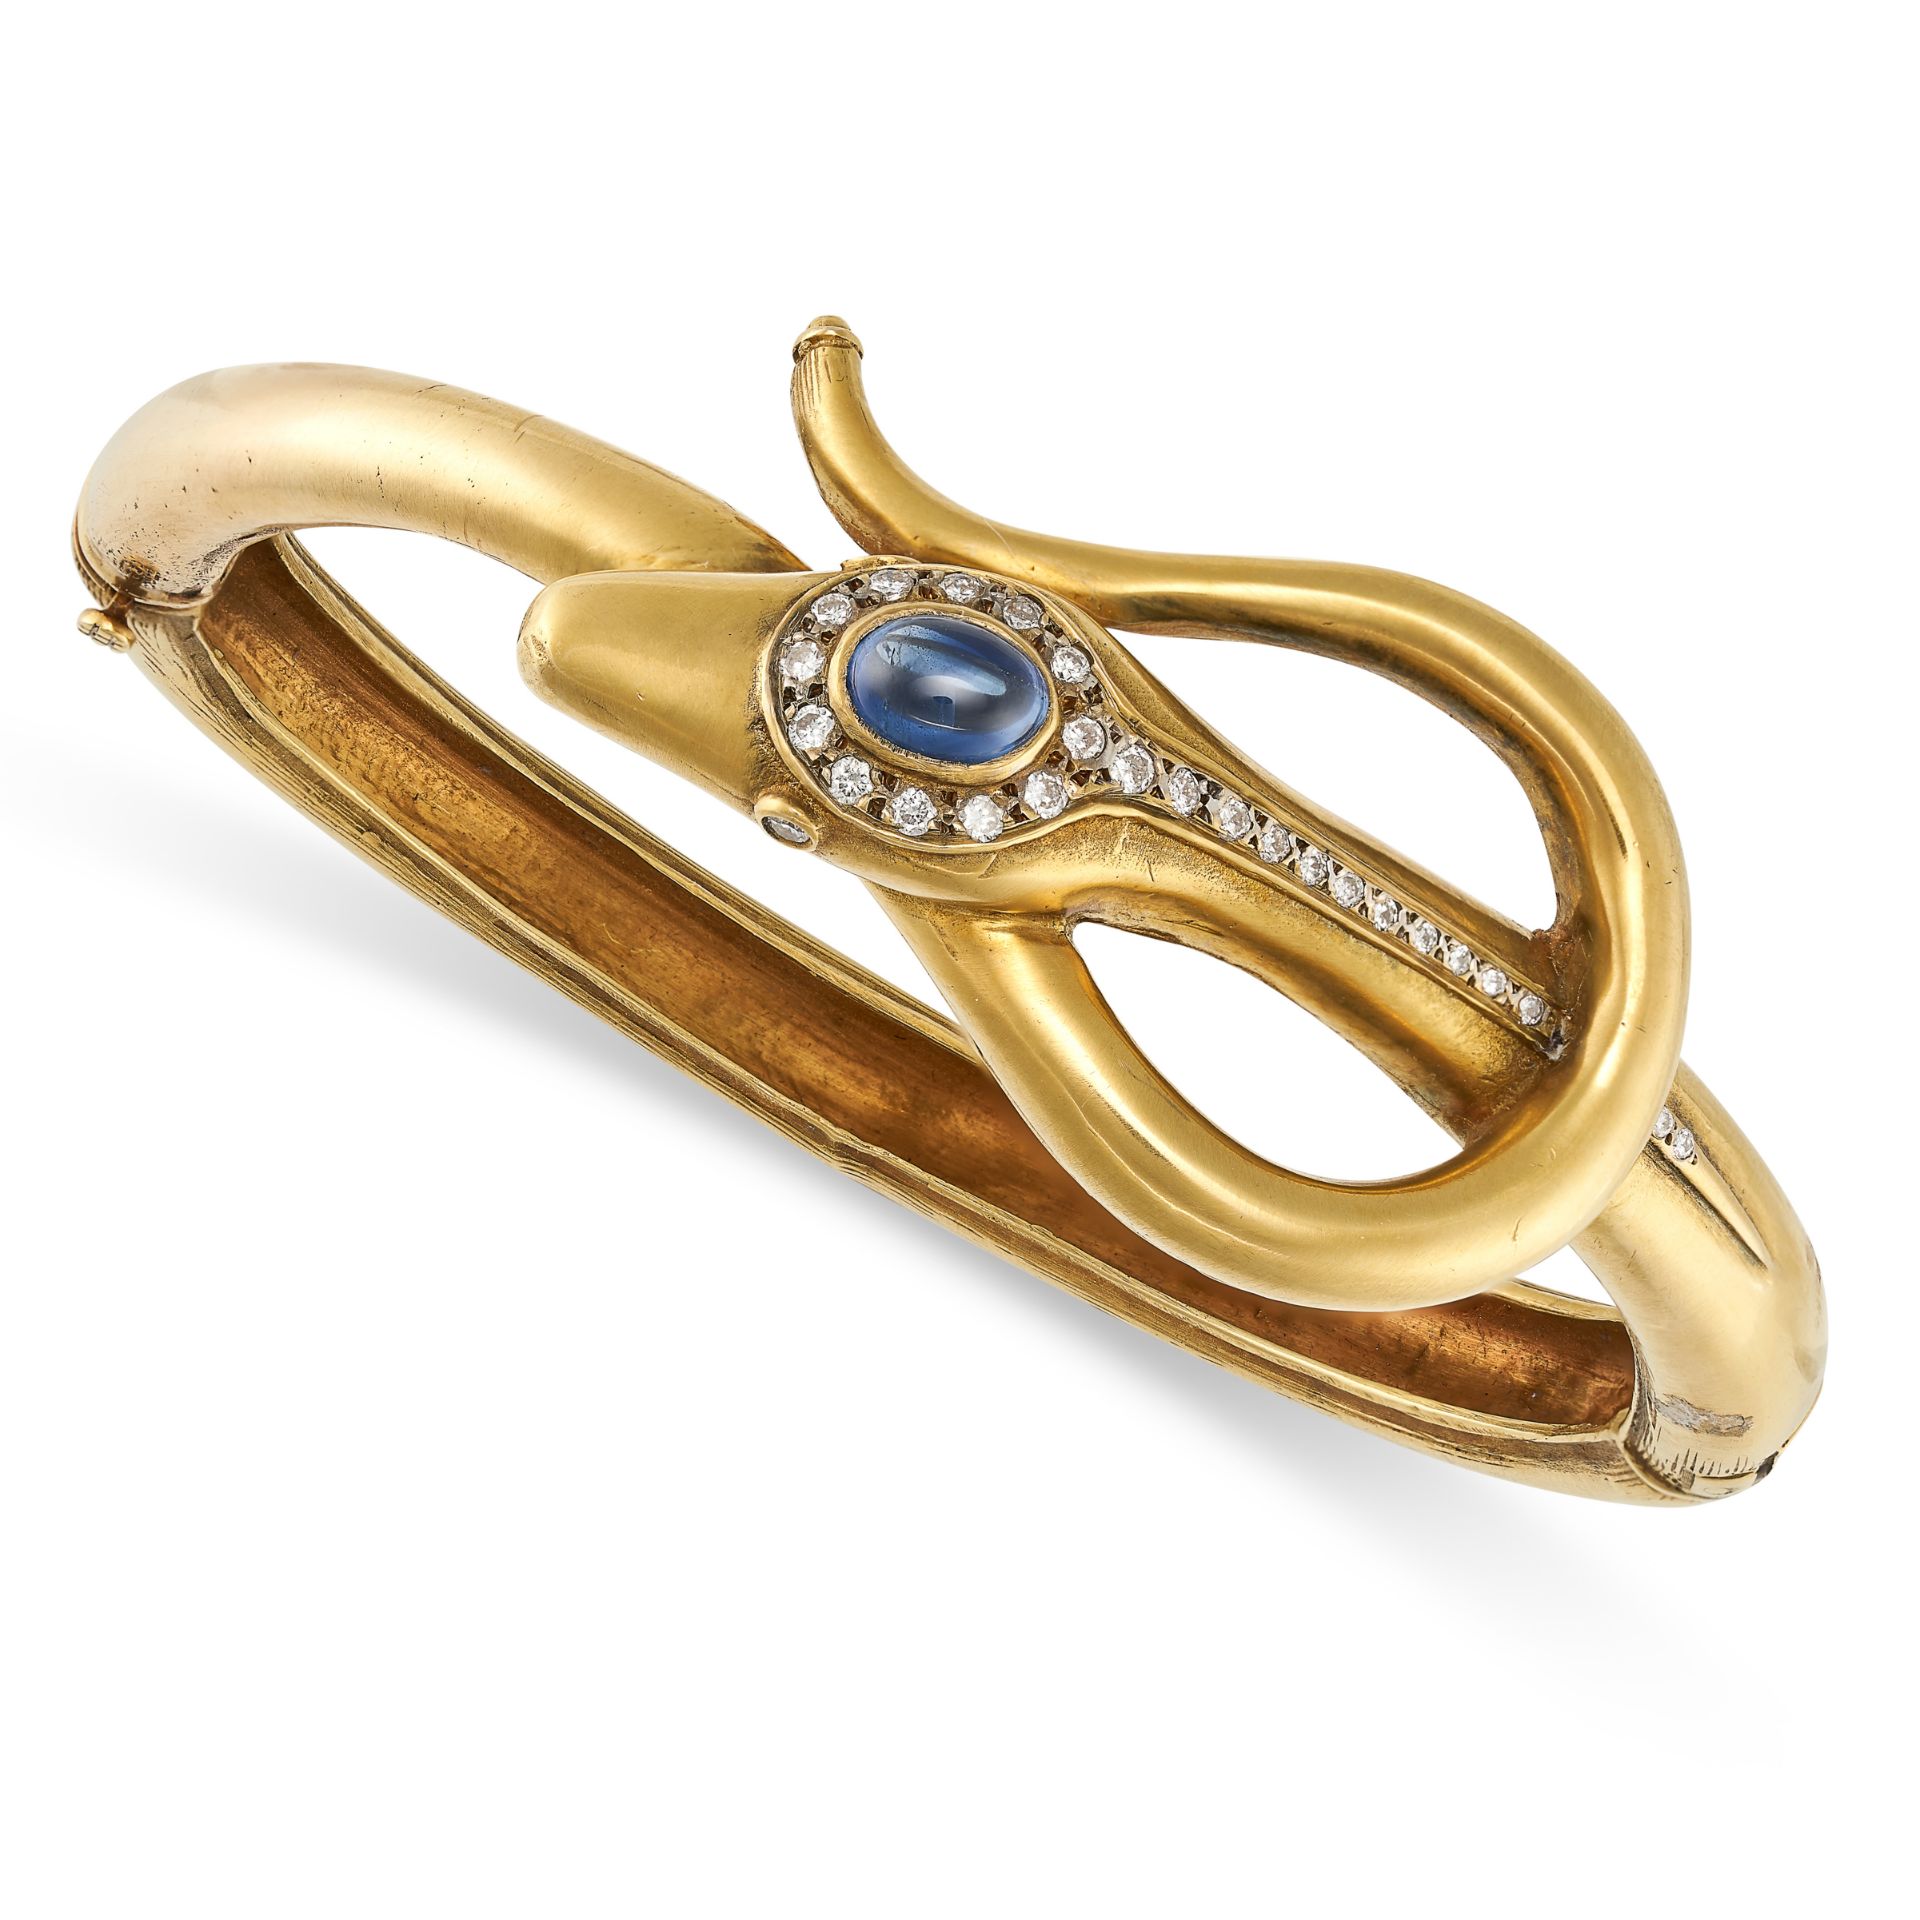 A SAPPHIRE AND DIAMOND SNAKE BANGLE in 18ct yellow gold, designed as a snake coiled around itself...